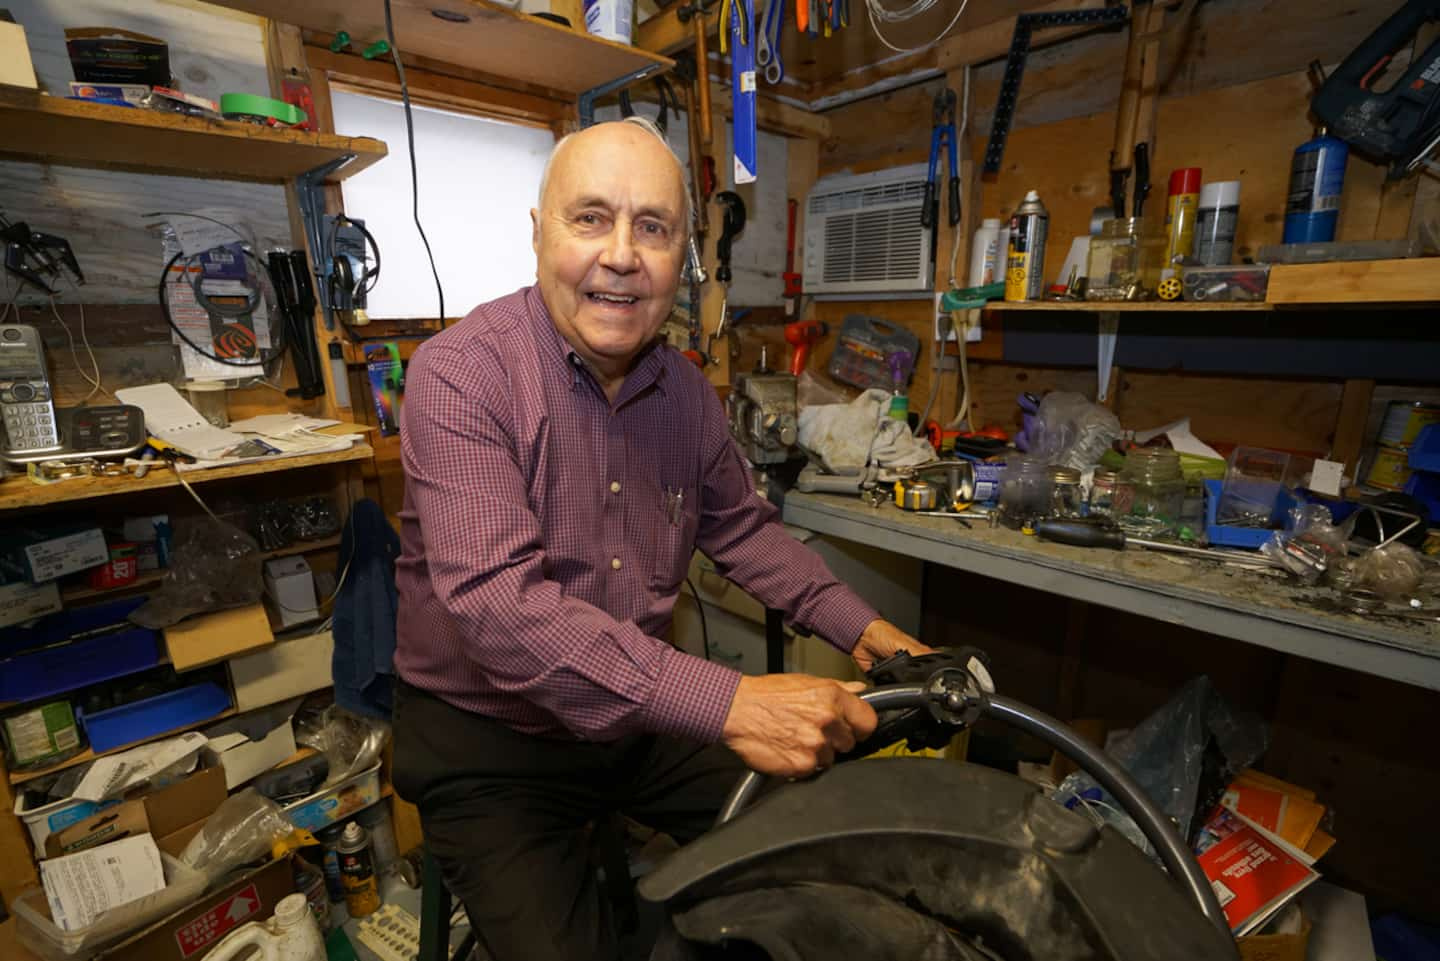 At 83, he continues to give strollers a second life